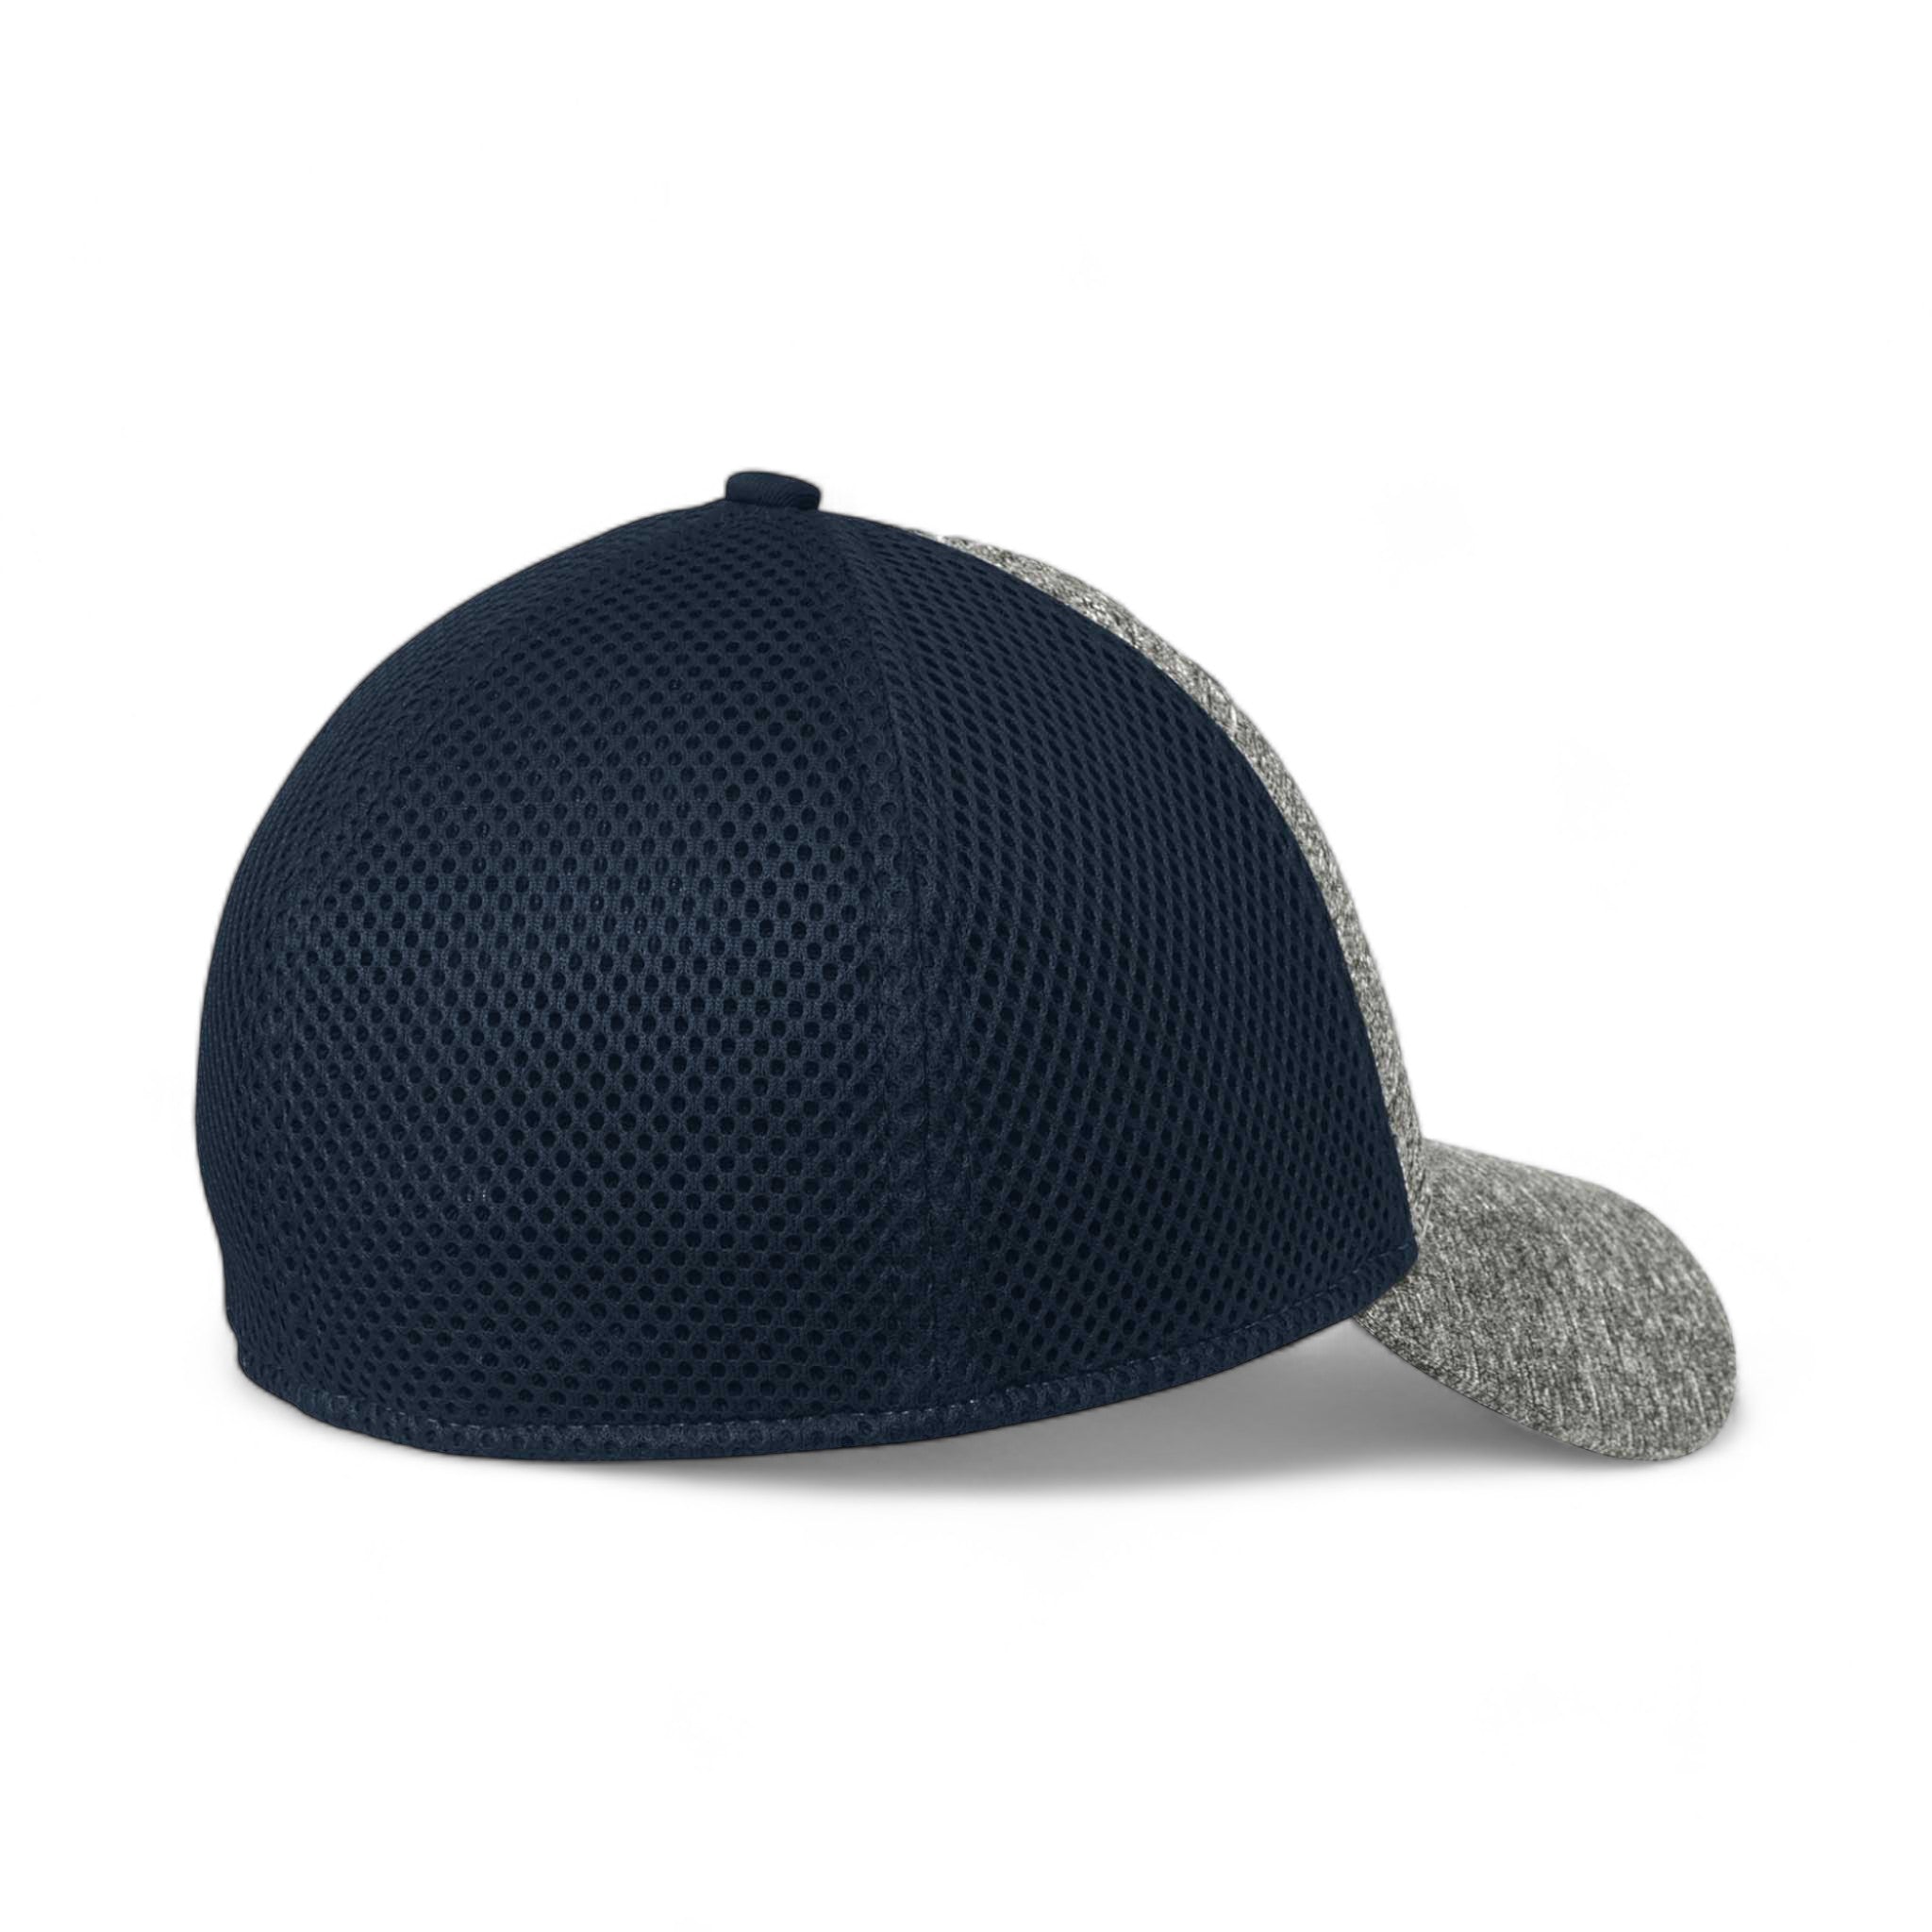 Back view of New Era NE702 custom hat in deep navy and shadow heather